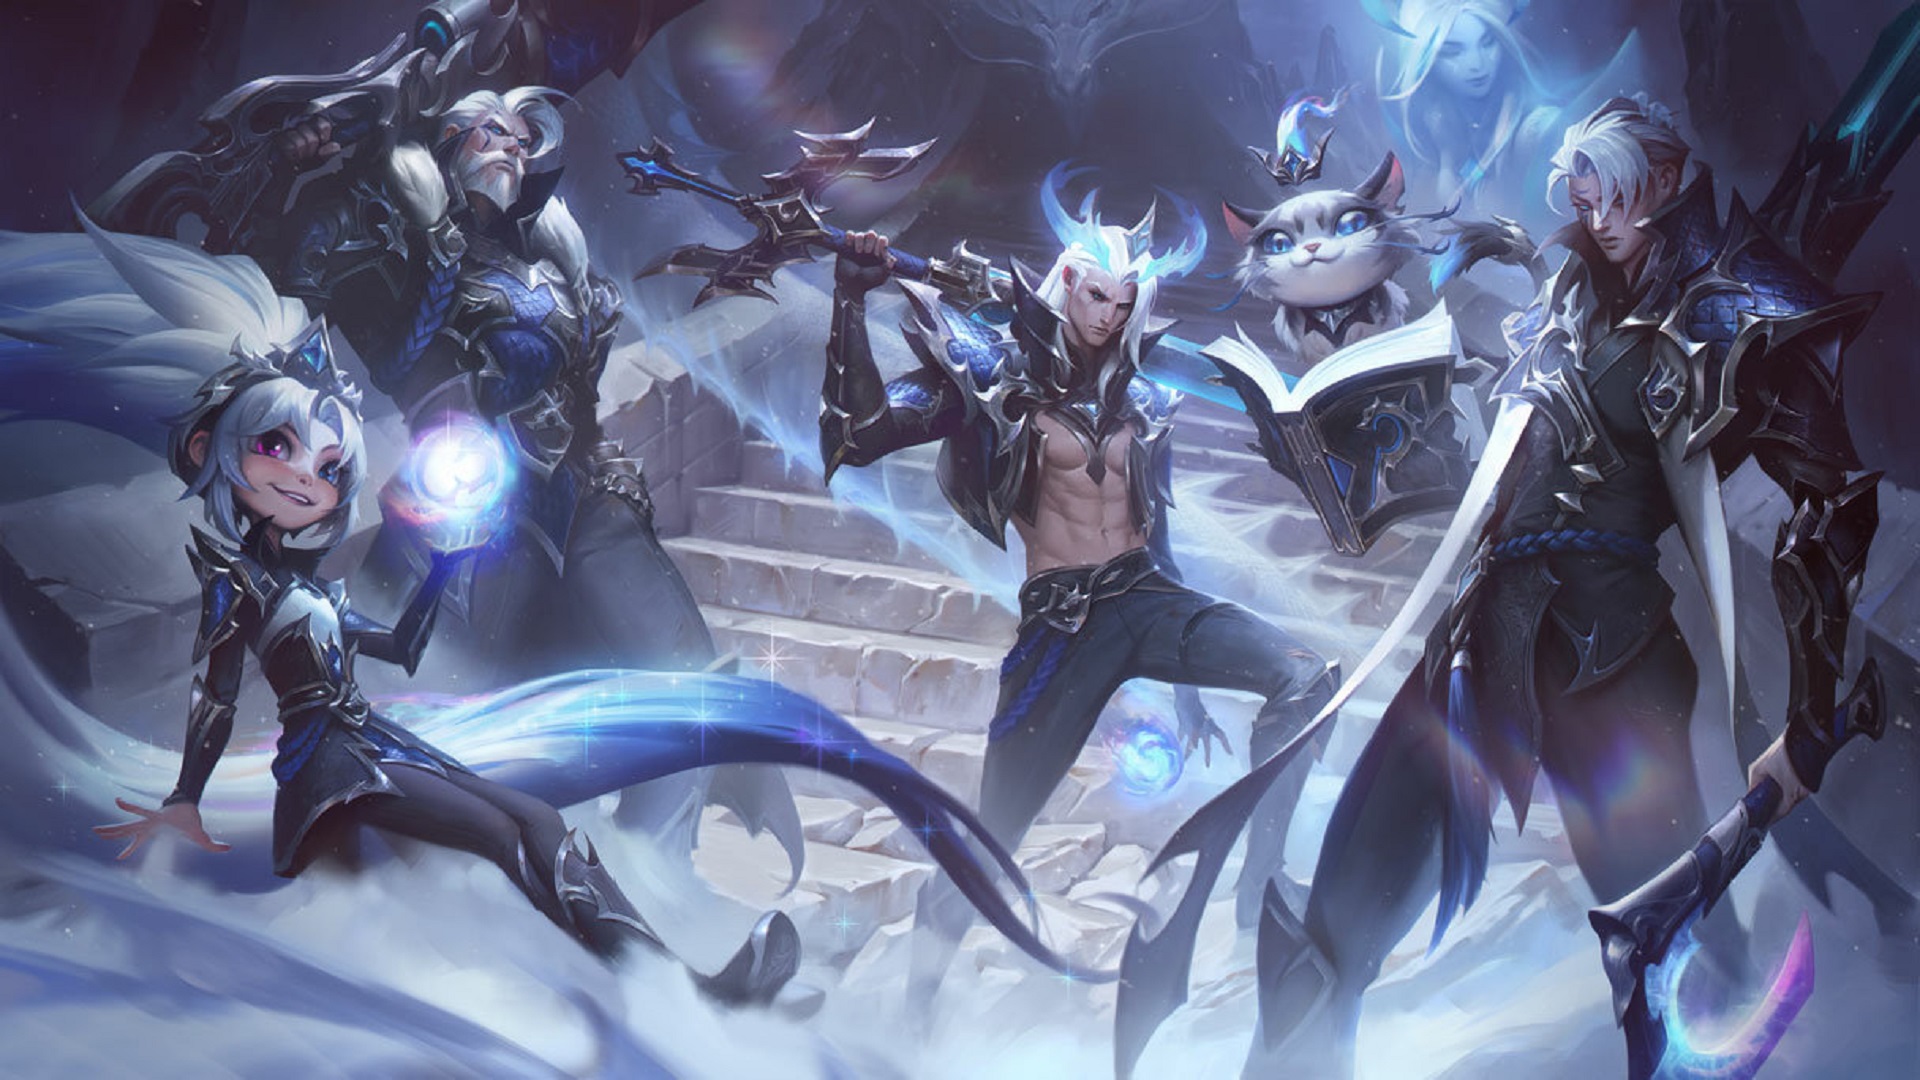 New Summoner's Cup design may have been leaked through a League ward skin -  Dot Esports